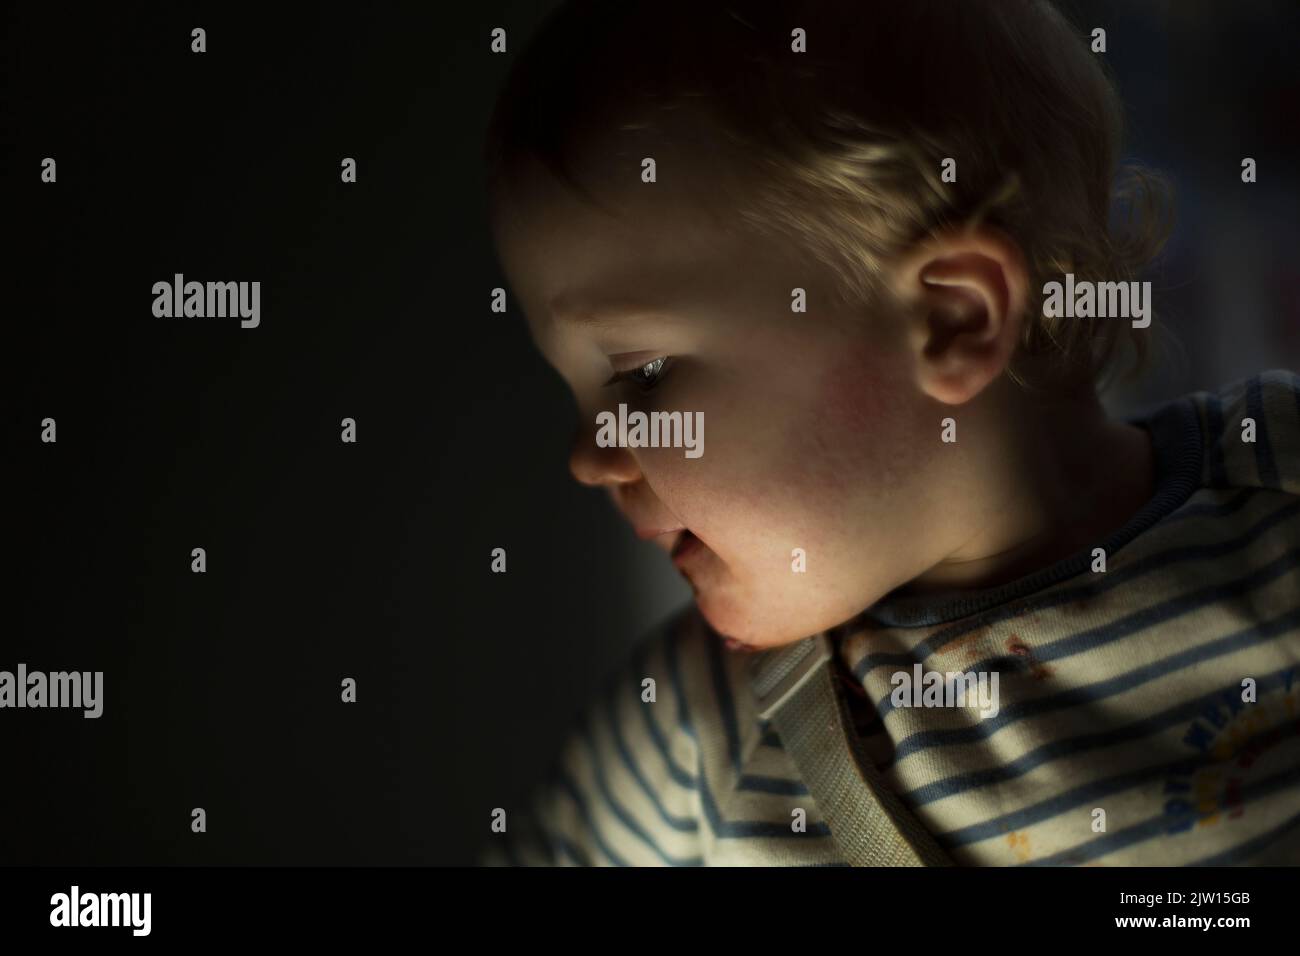 Toddler Caucasian male looks sideways with a lower light, creating a slightly dramatic look. Stock Photo